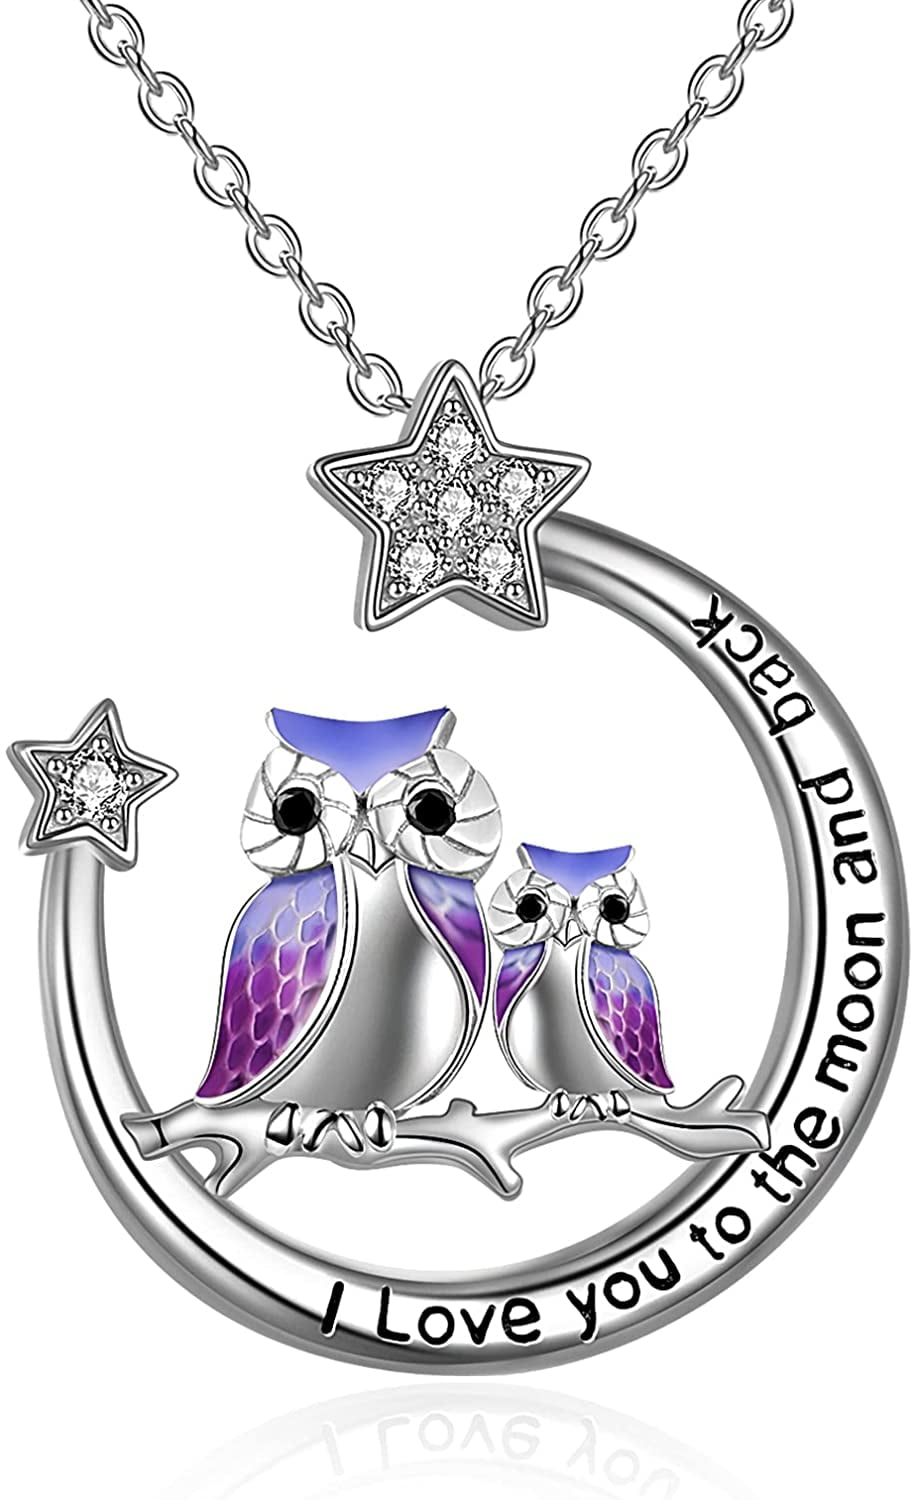 Owls Gifts for Women Inspirational Gifts Sterling Silver Owl Necklaces for Women Girls with Card and Gift Box 